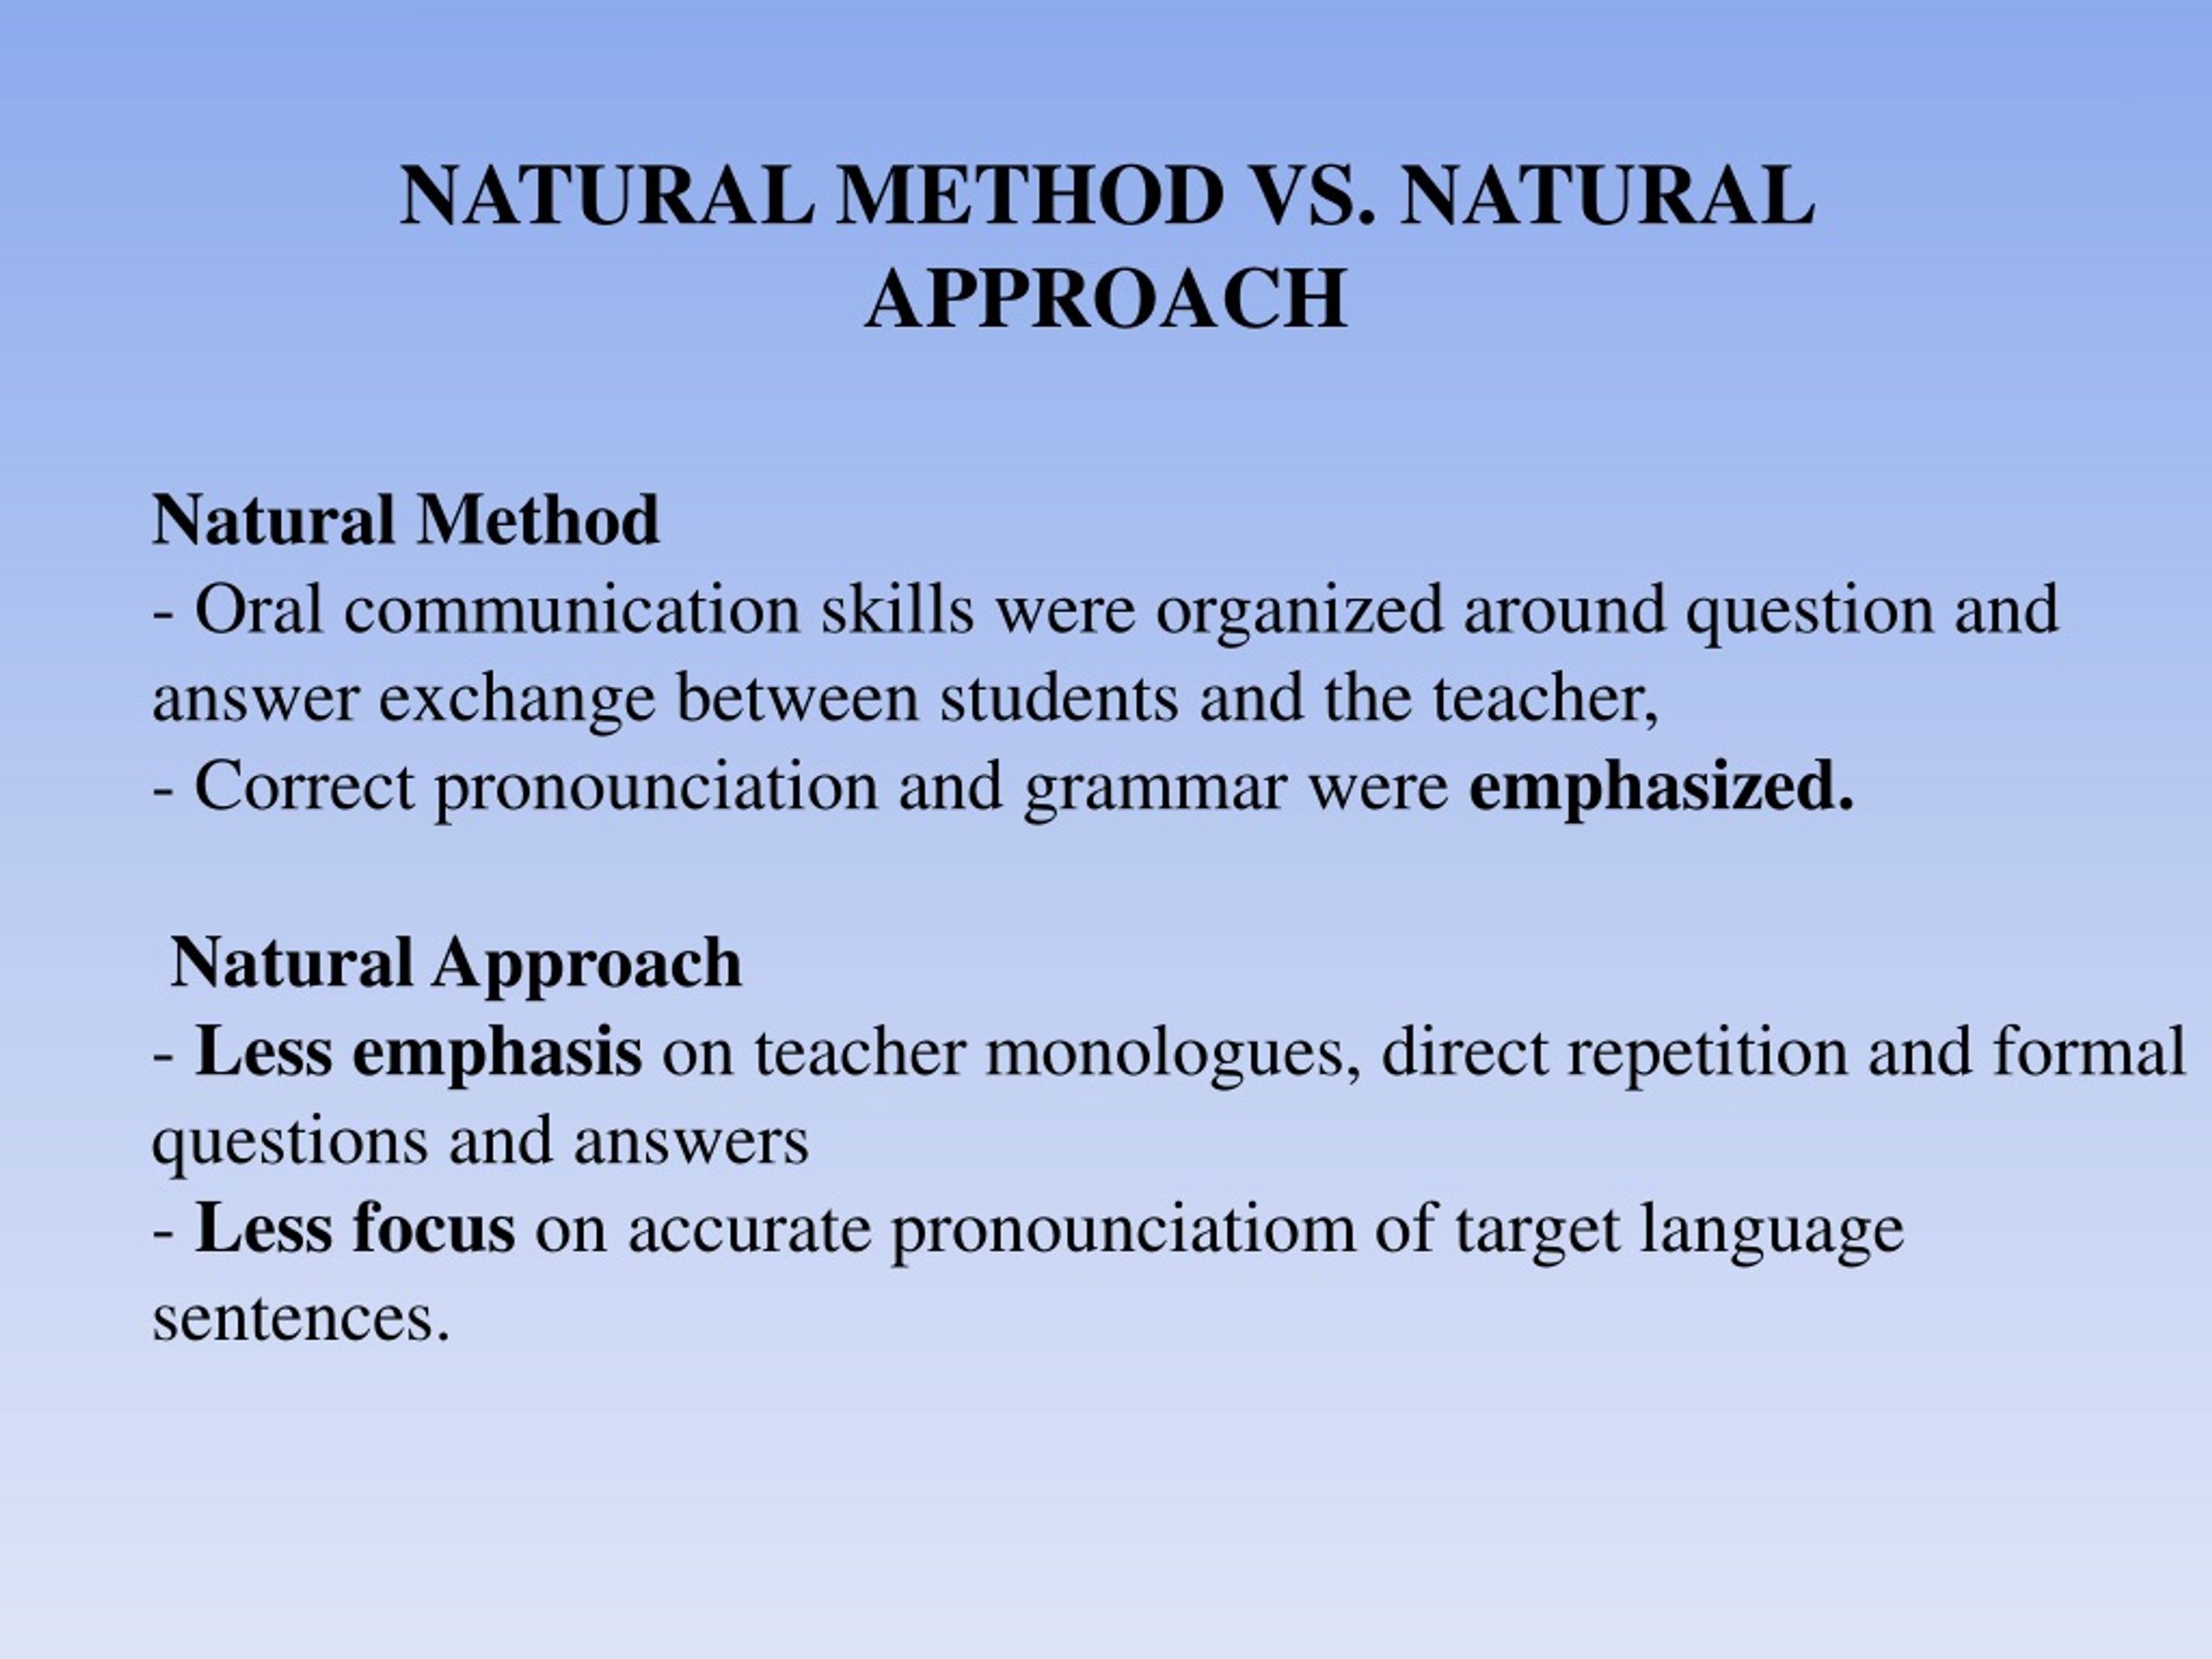 hypothesis of natural approach